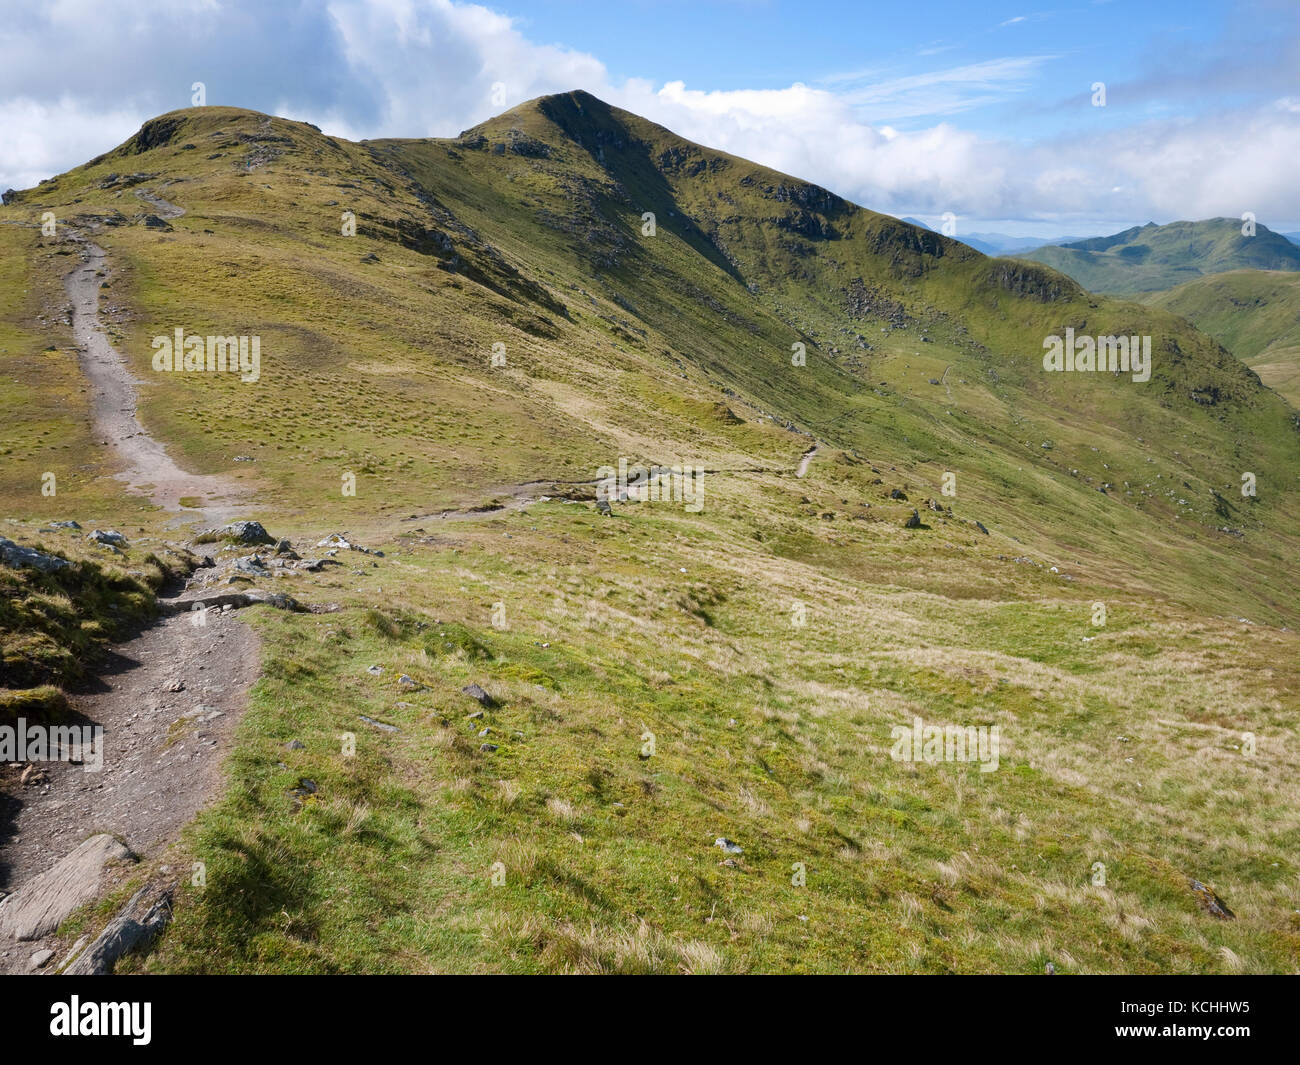 The view south west from Ben Lawers, showing Beinn Ghlas and Meall nan Tarmachan Stock Photo